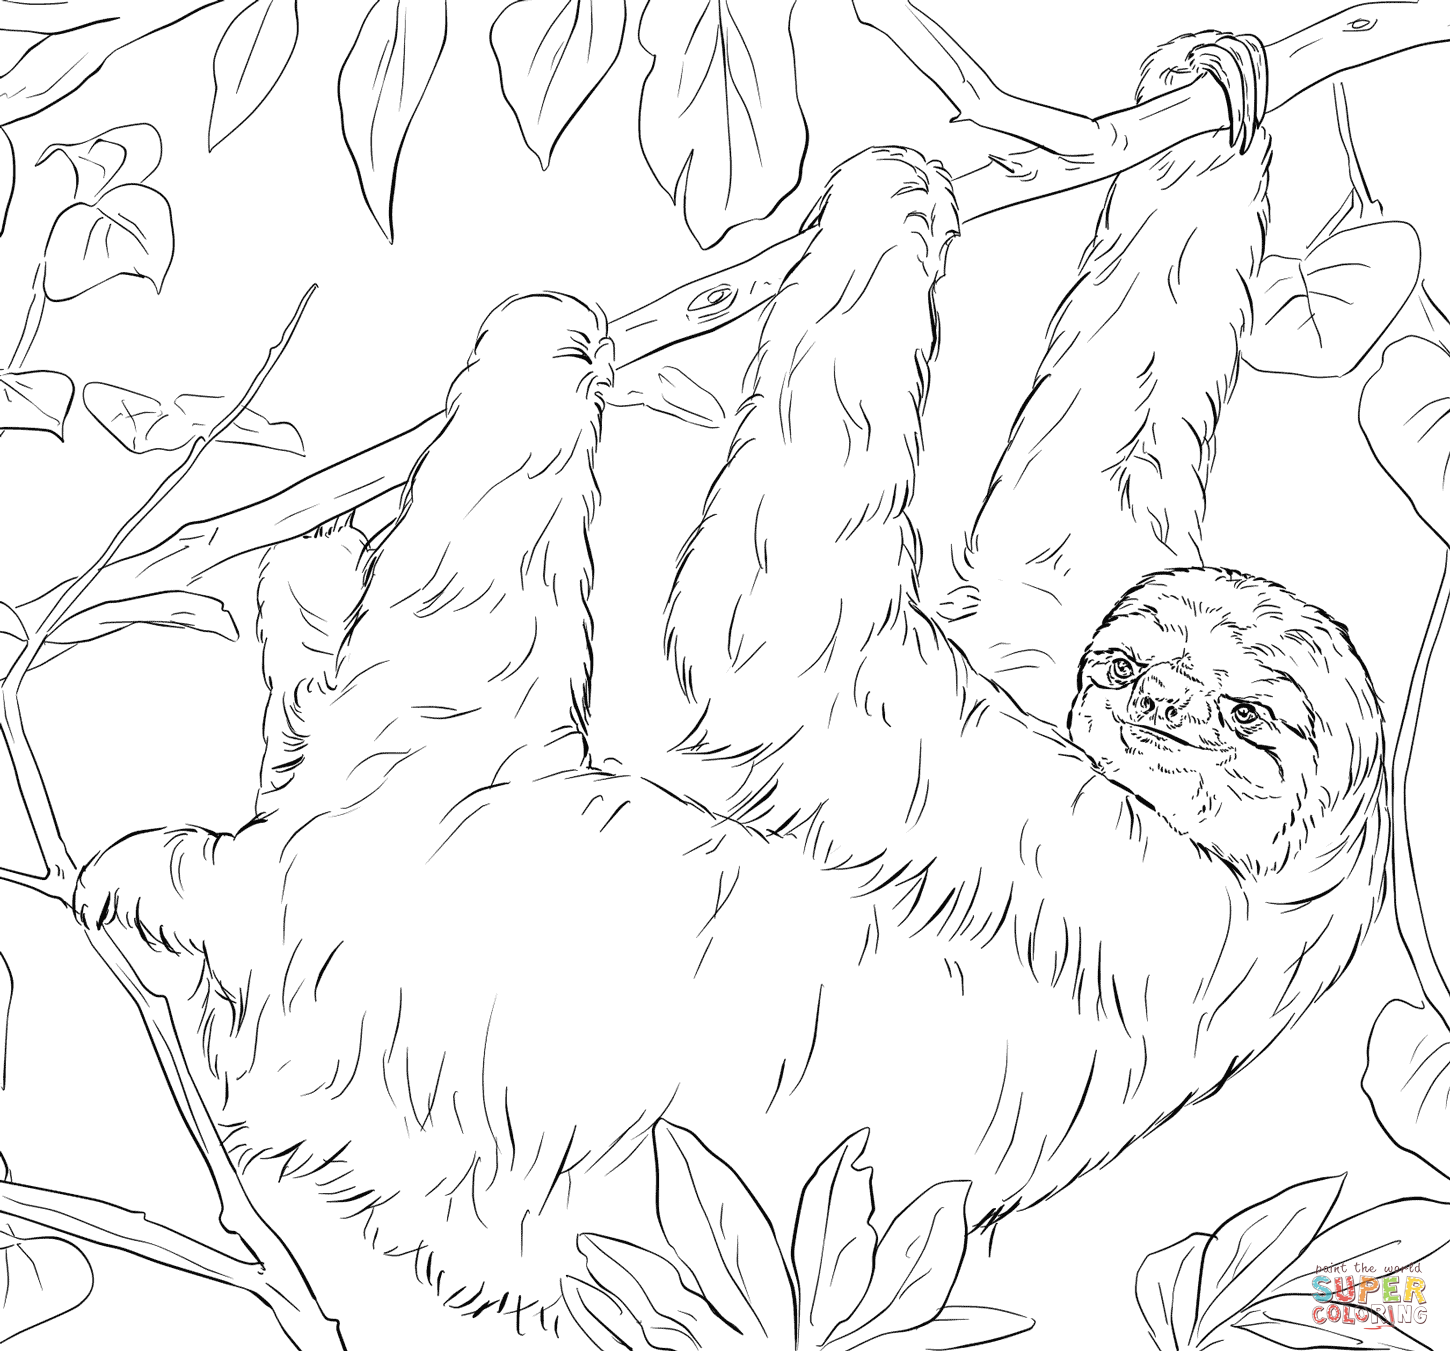 Sloth coloring page